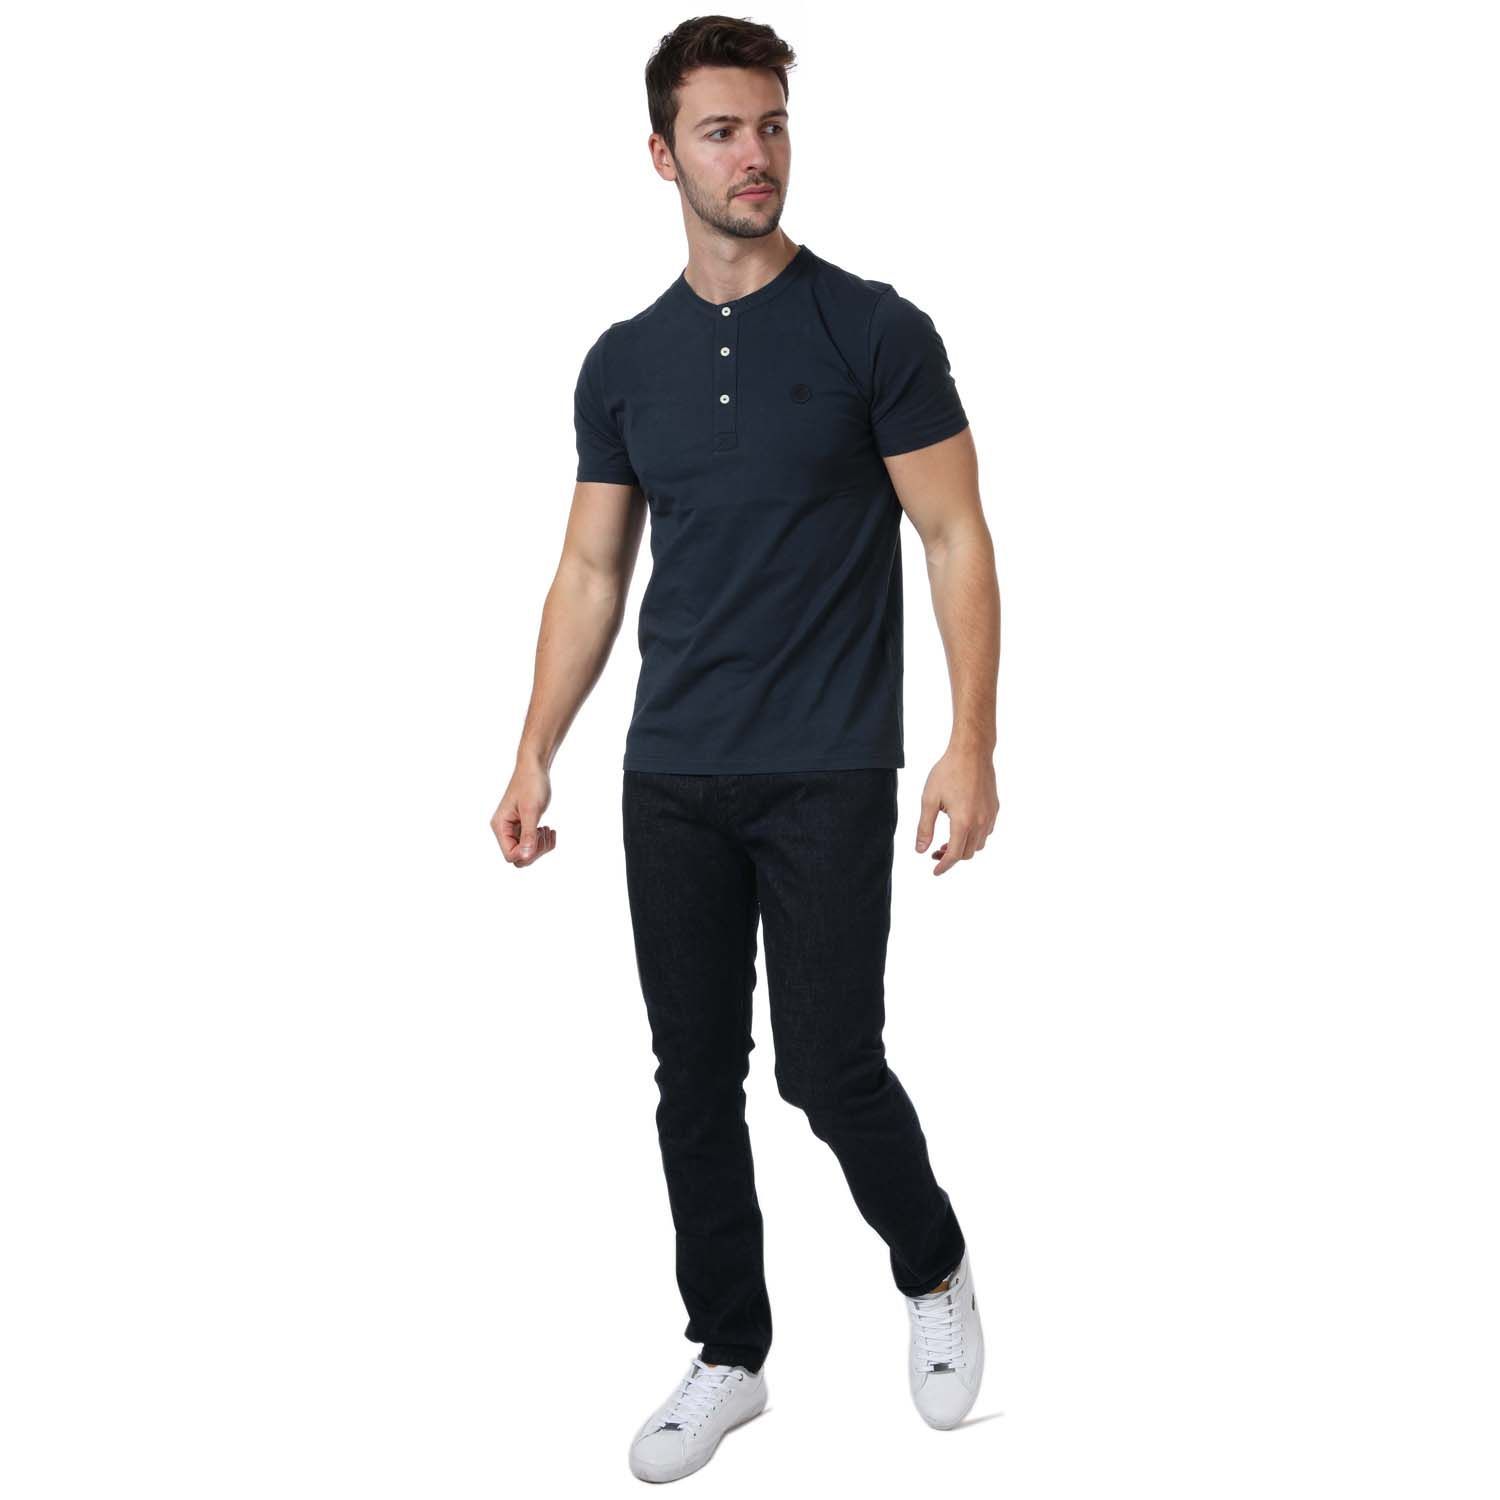 Mens Pretty Green Beta Henley T- Shirt in navy.- Grandad collar.- 3 button placket.- Pretty Green logo embroidered at the chest.- Slim fit.- 100% Organic Cotton. Machine washable.- Ref: G21Q3MUJER898N